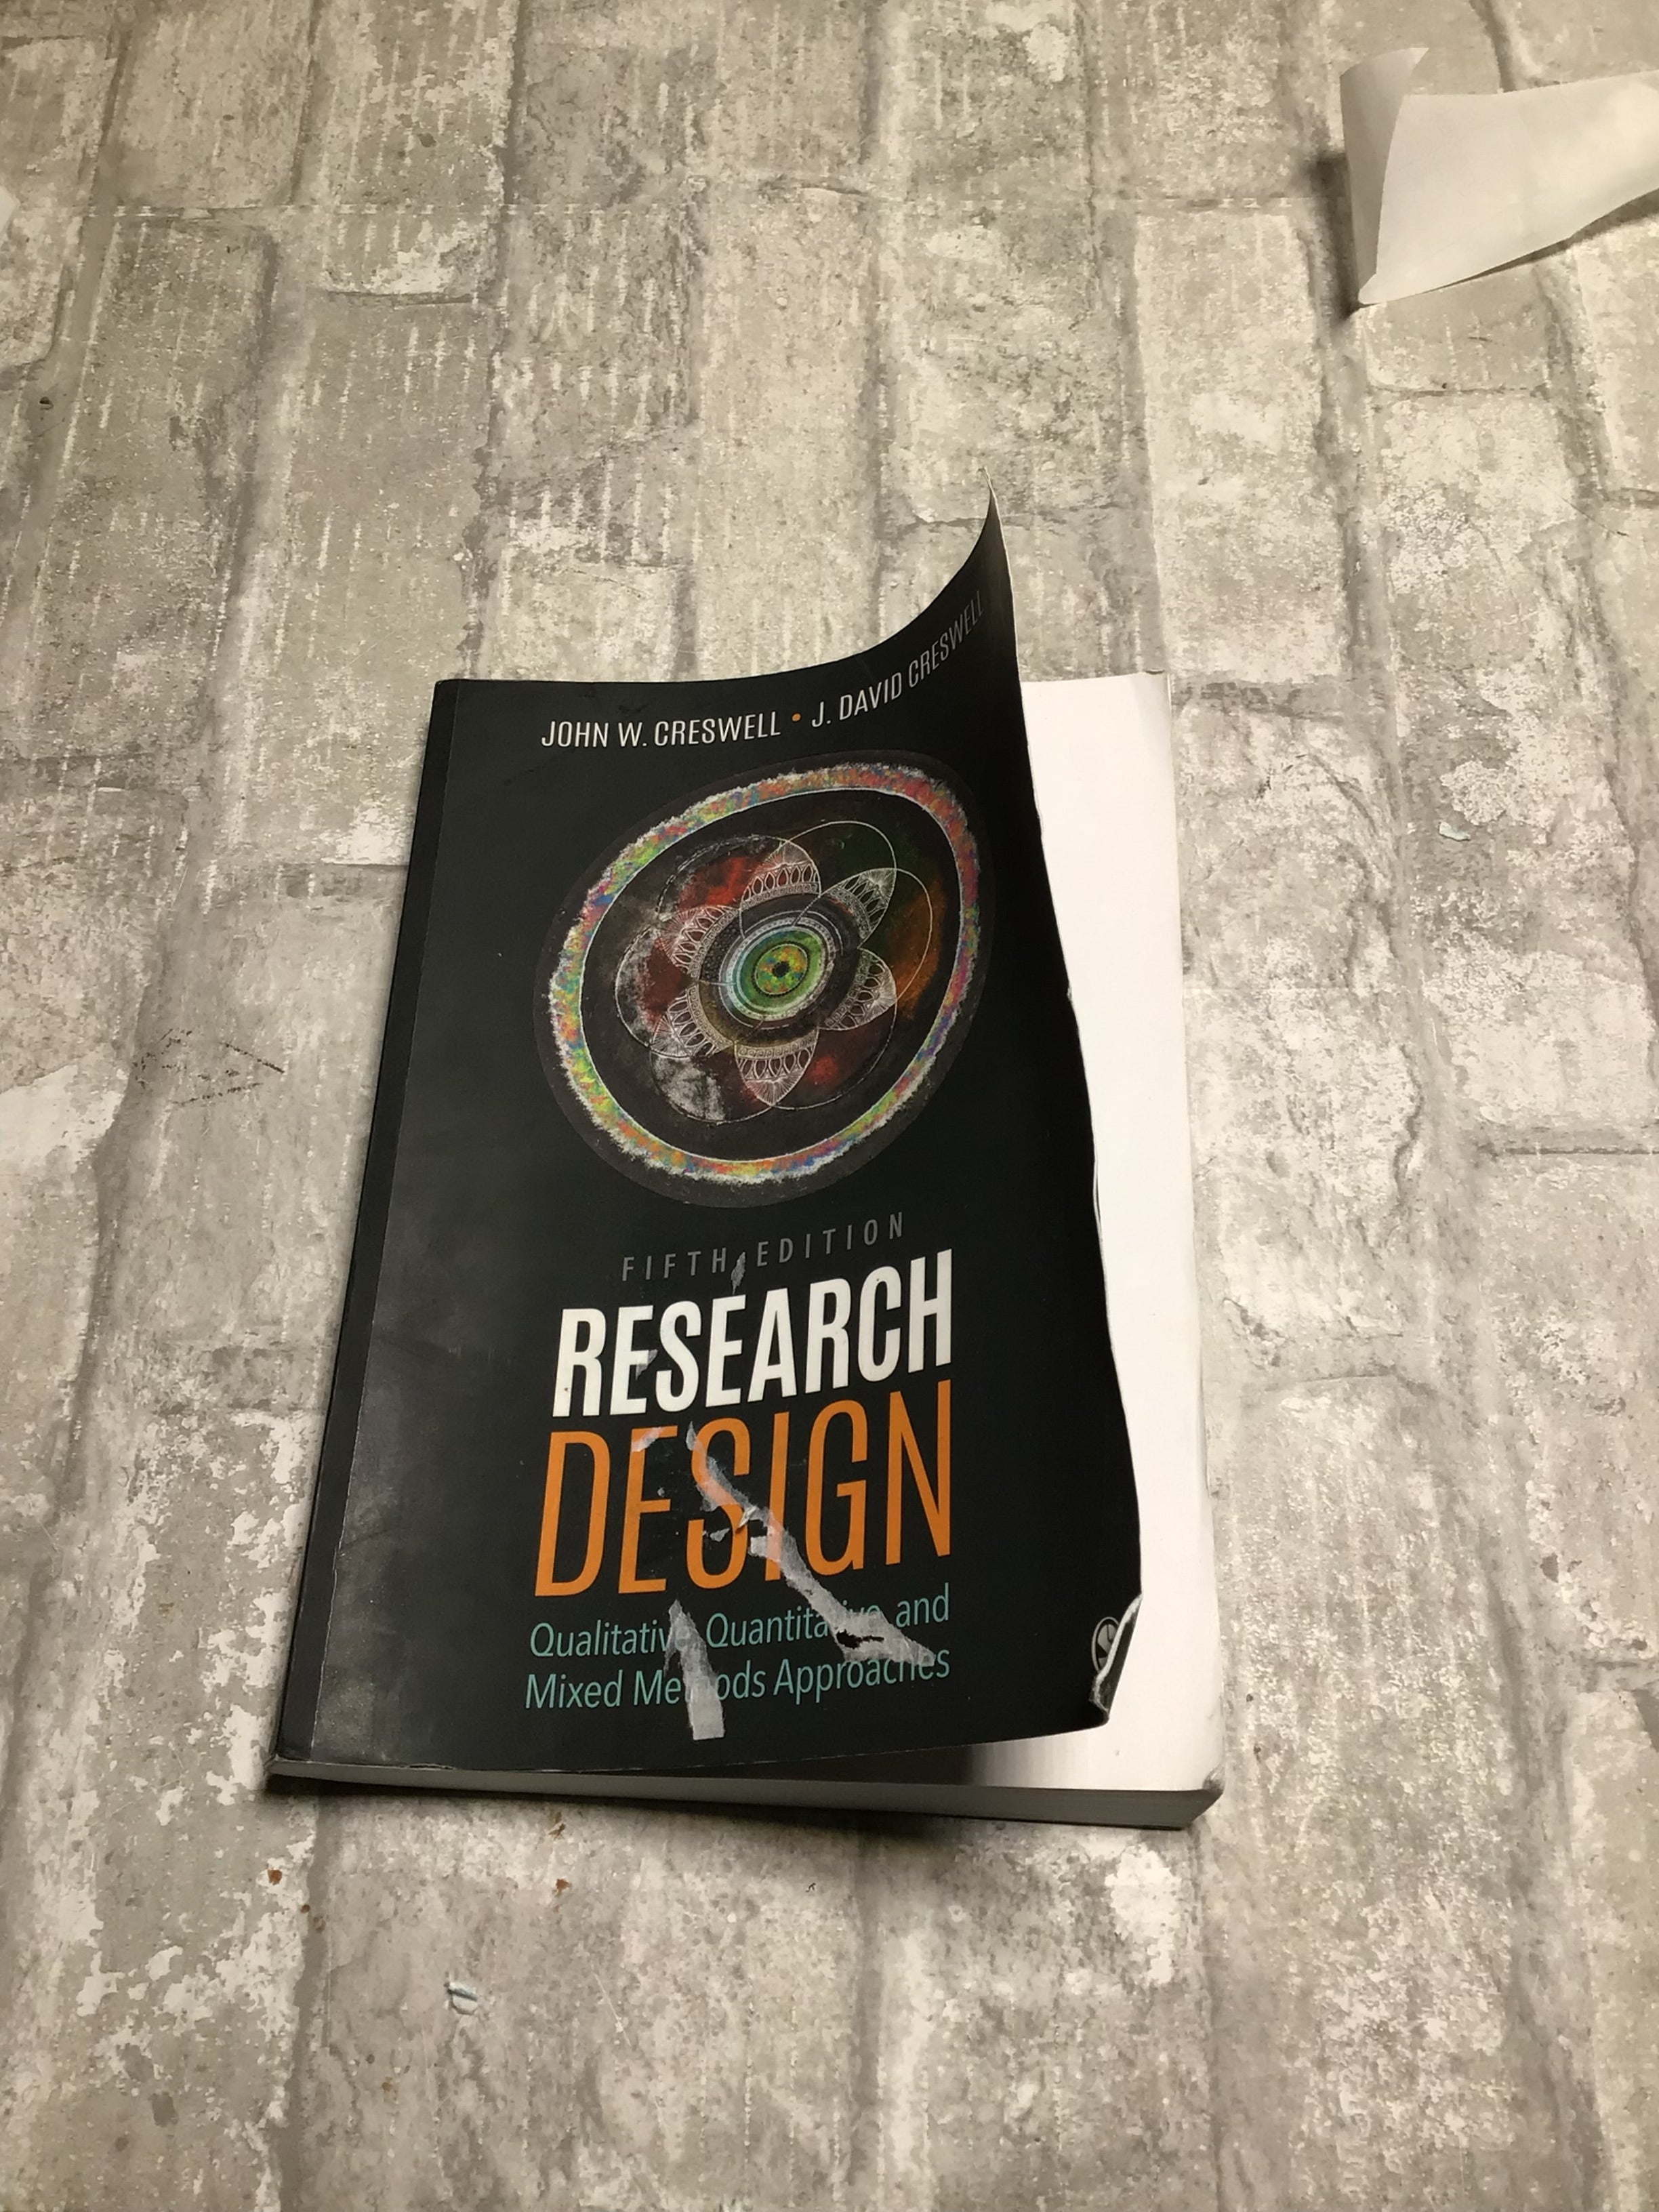 Research Design: Qualitative, Quantitative, and Mixed Methods Approaches 5th Edition (8220615835886)